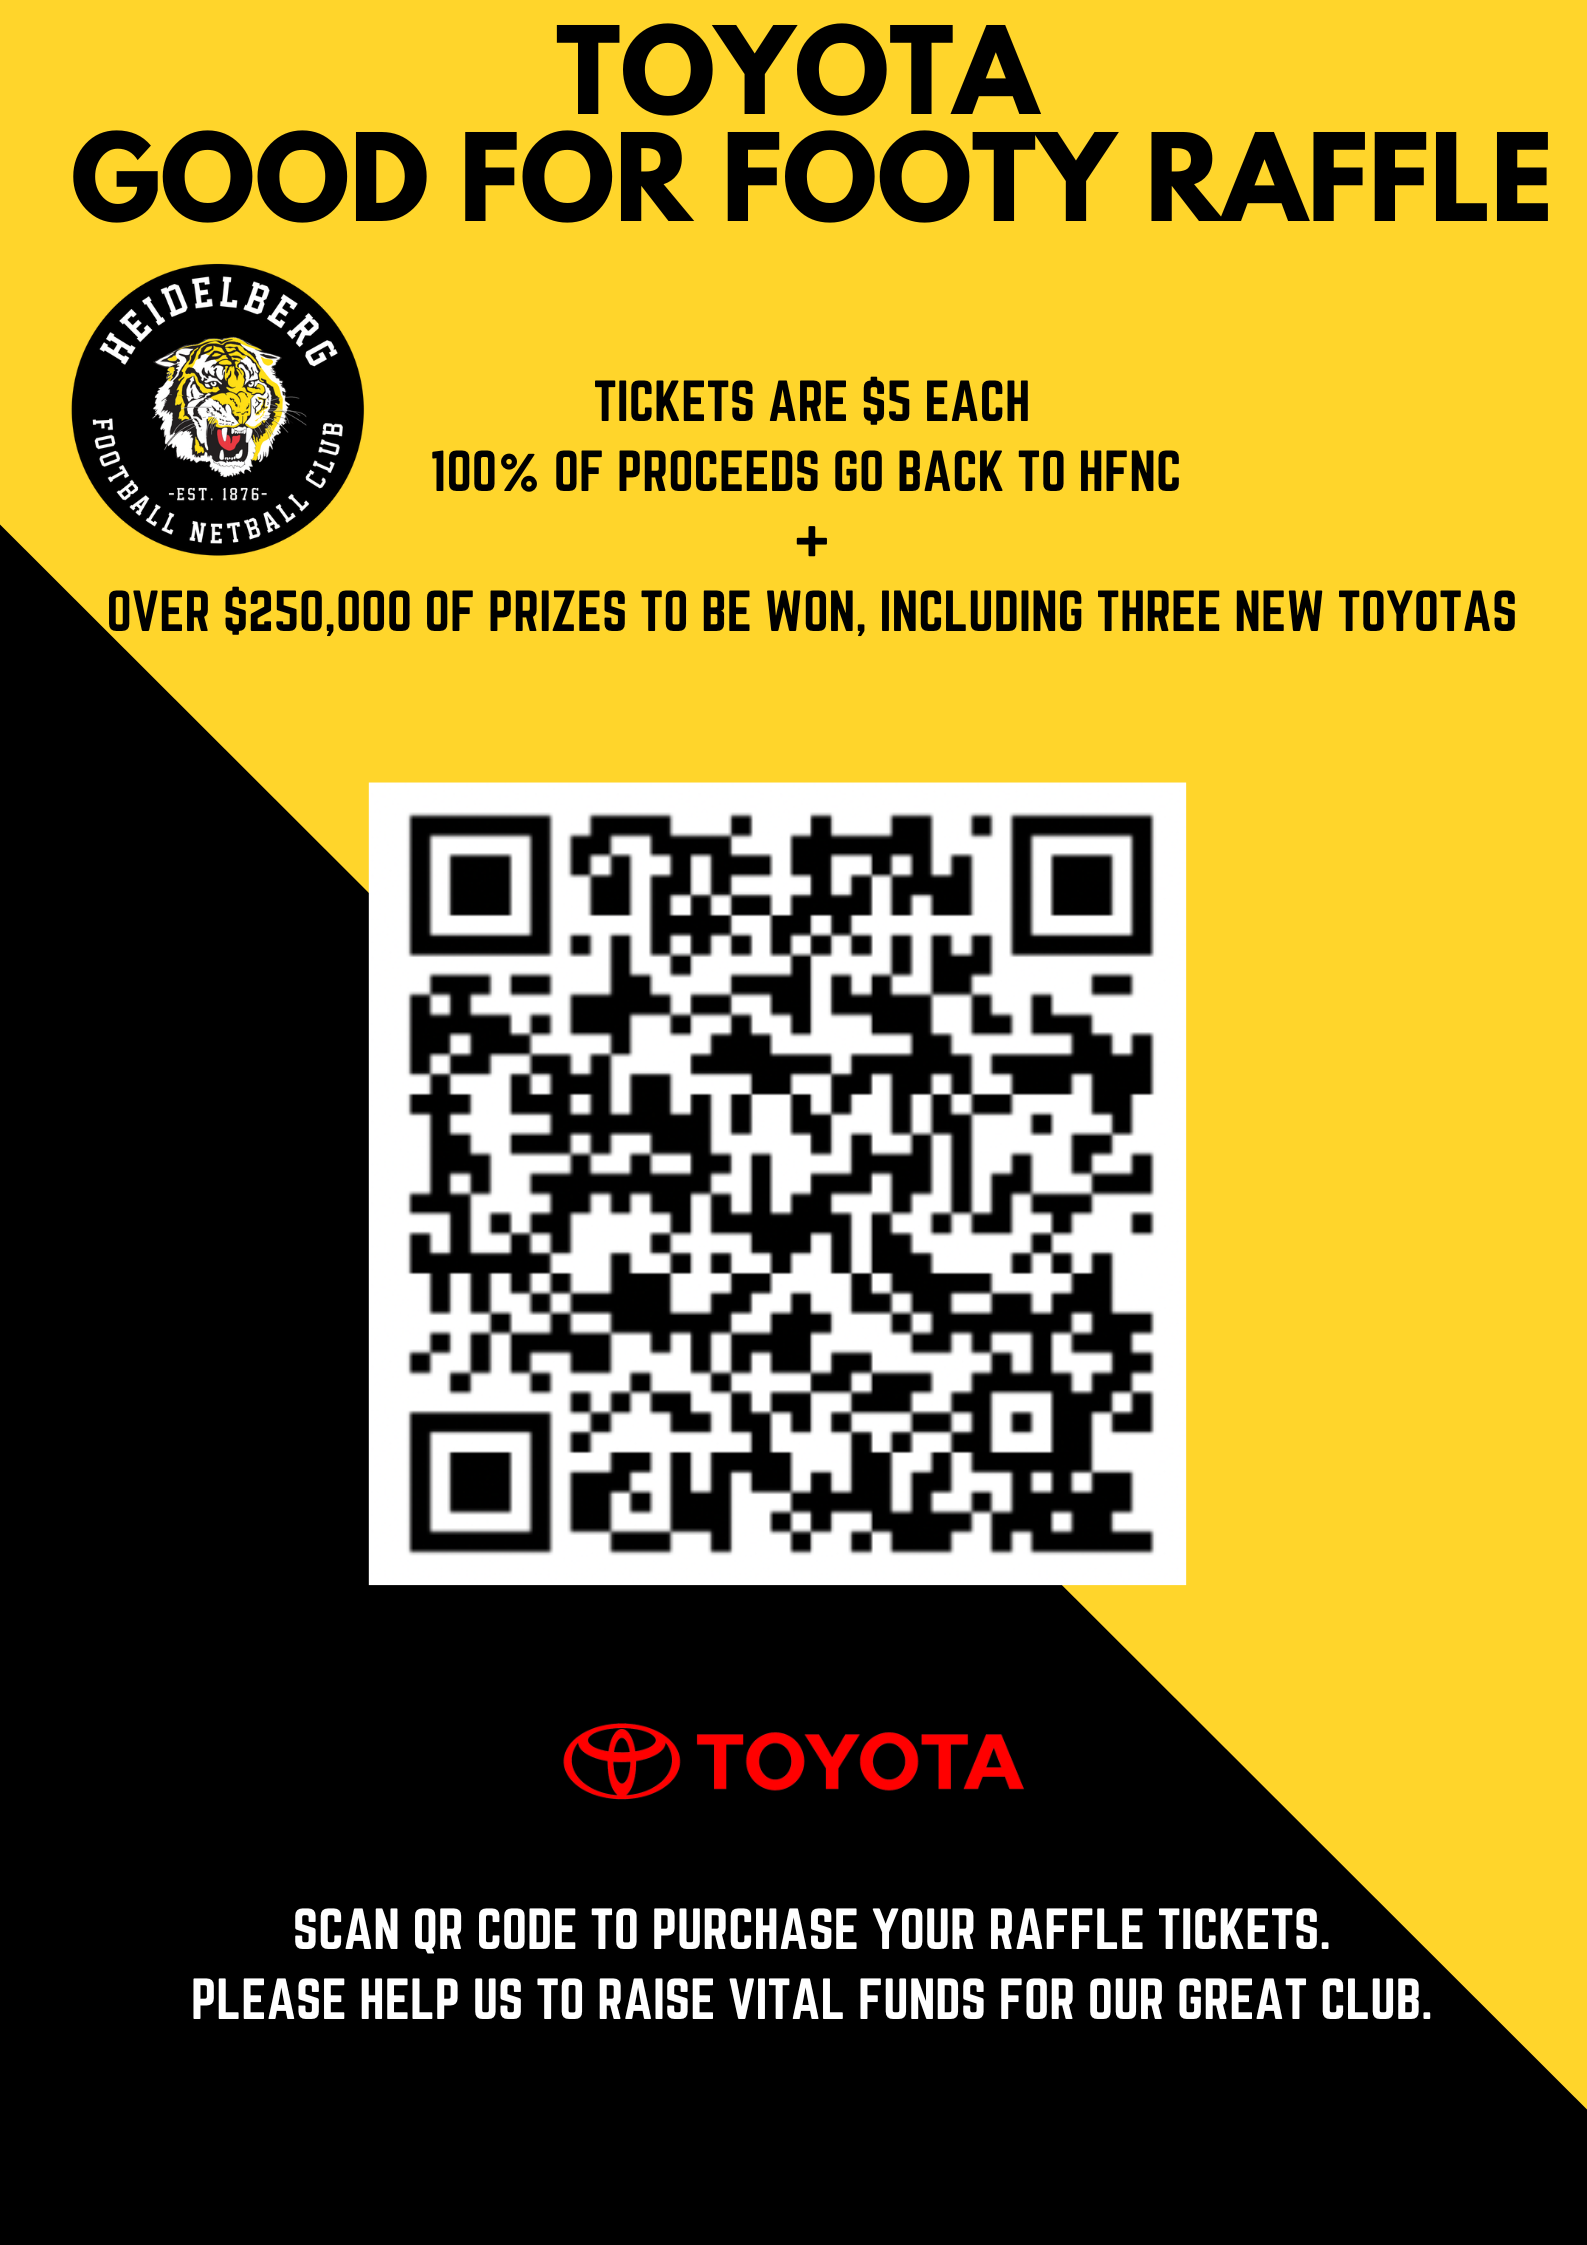 Toyota__good_for_footy_raffle (002).png